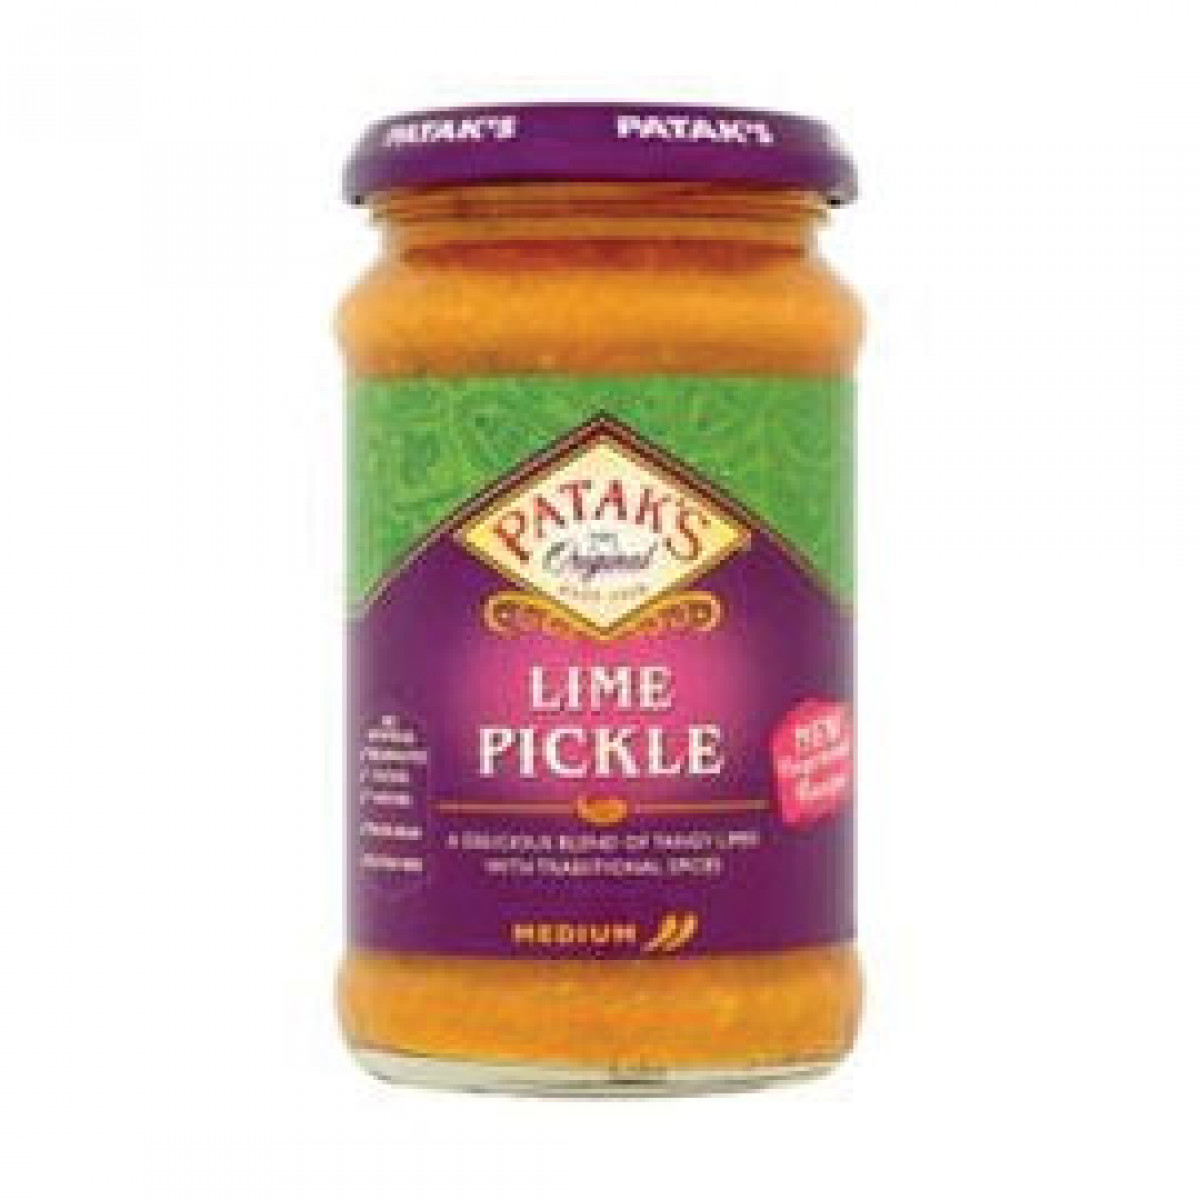 Product picture for Lime Pickle - medium